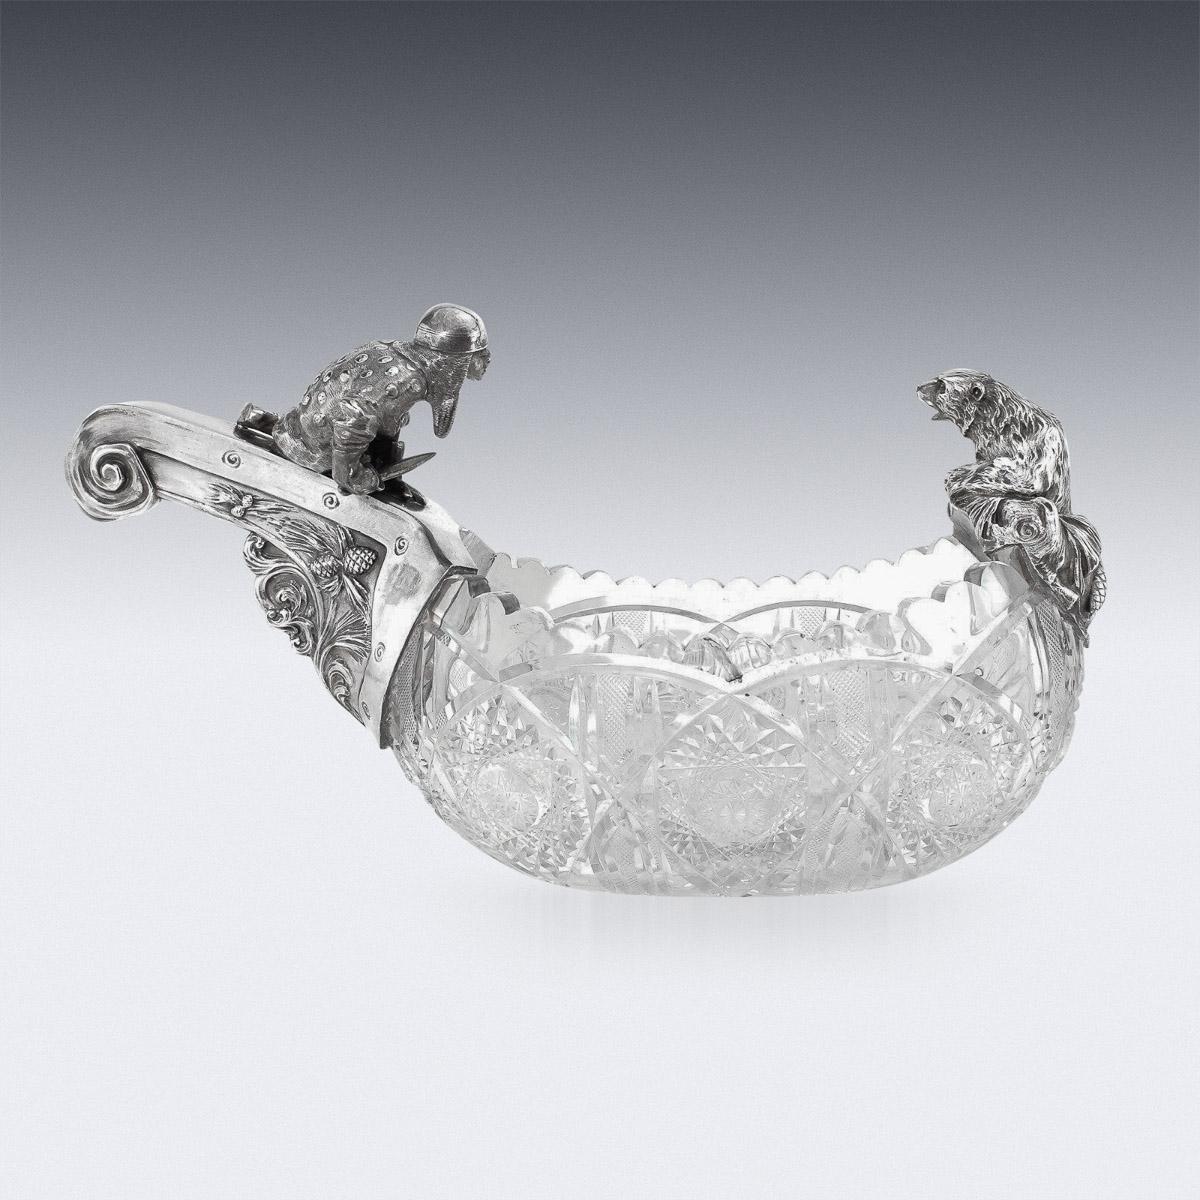 20th century Russian Pan-Slavic style silver & cut-glass kovsh, with a large curling mounted handle.The oval bowl with shaped rim, cut with diamond facets, the handle mounted with a finely cast bogatyr preparing to fight a bear that is climbing the